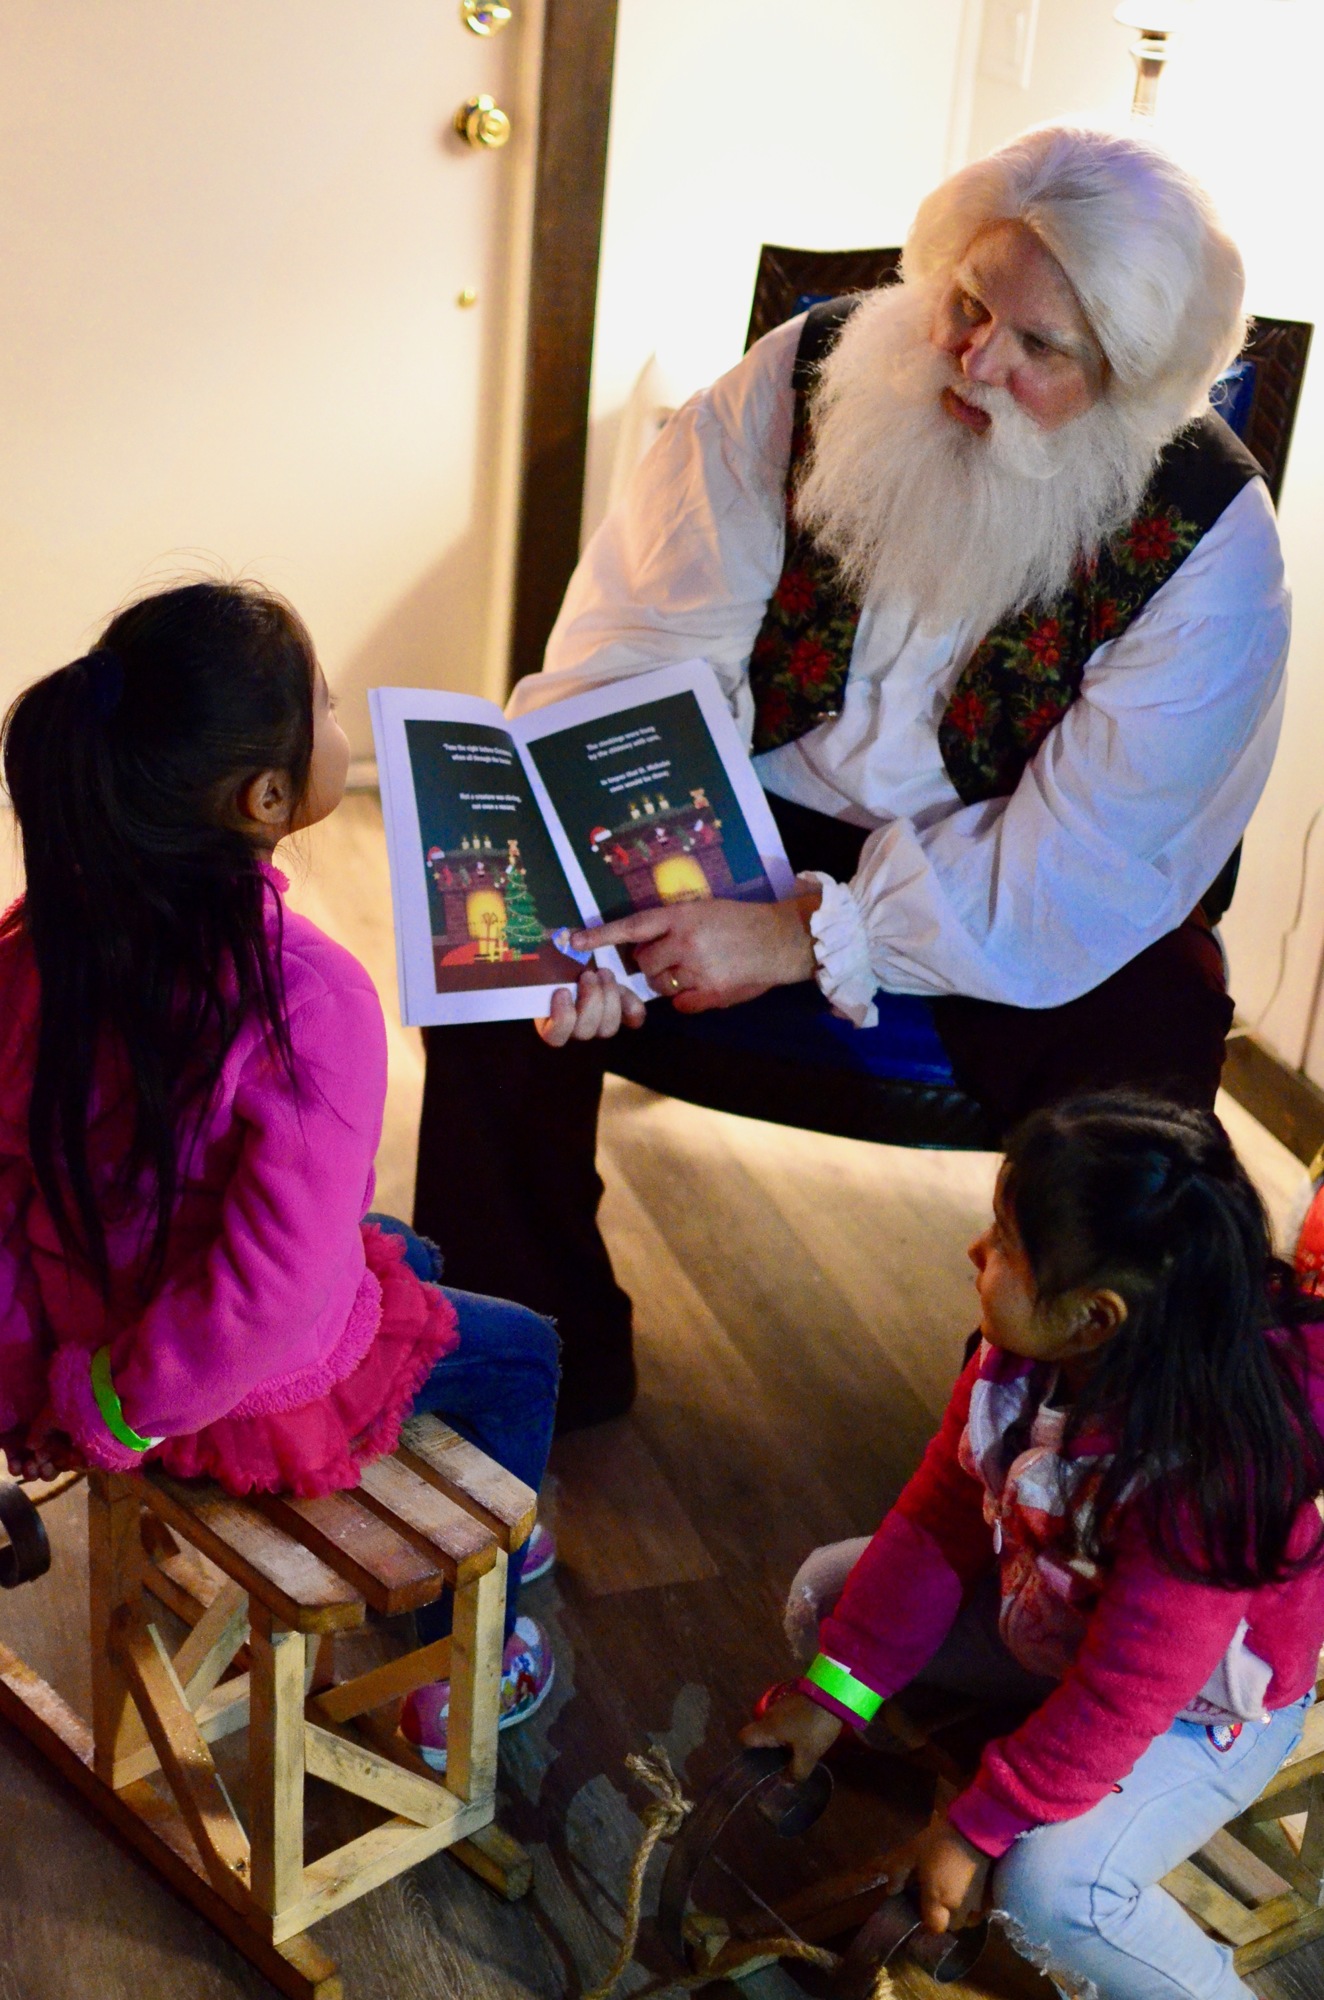 Santa Claus is happy to share stories with his visitors.